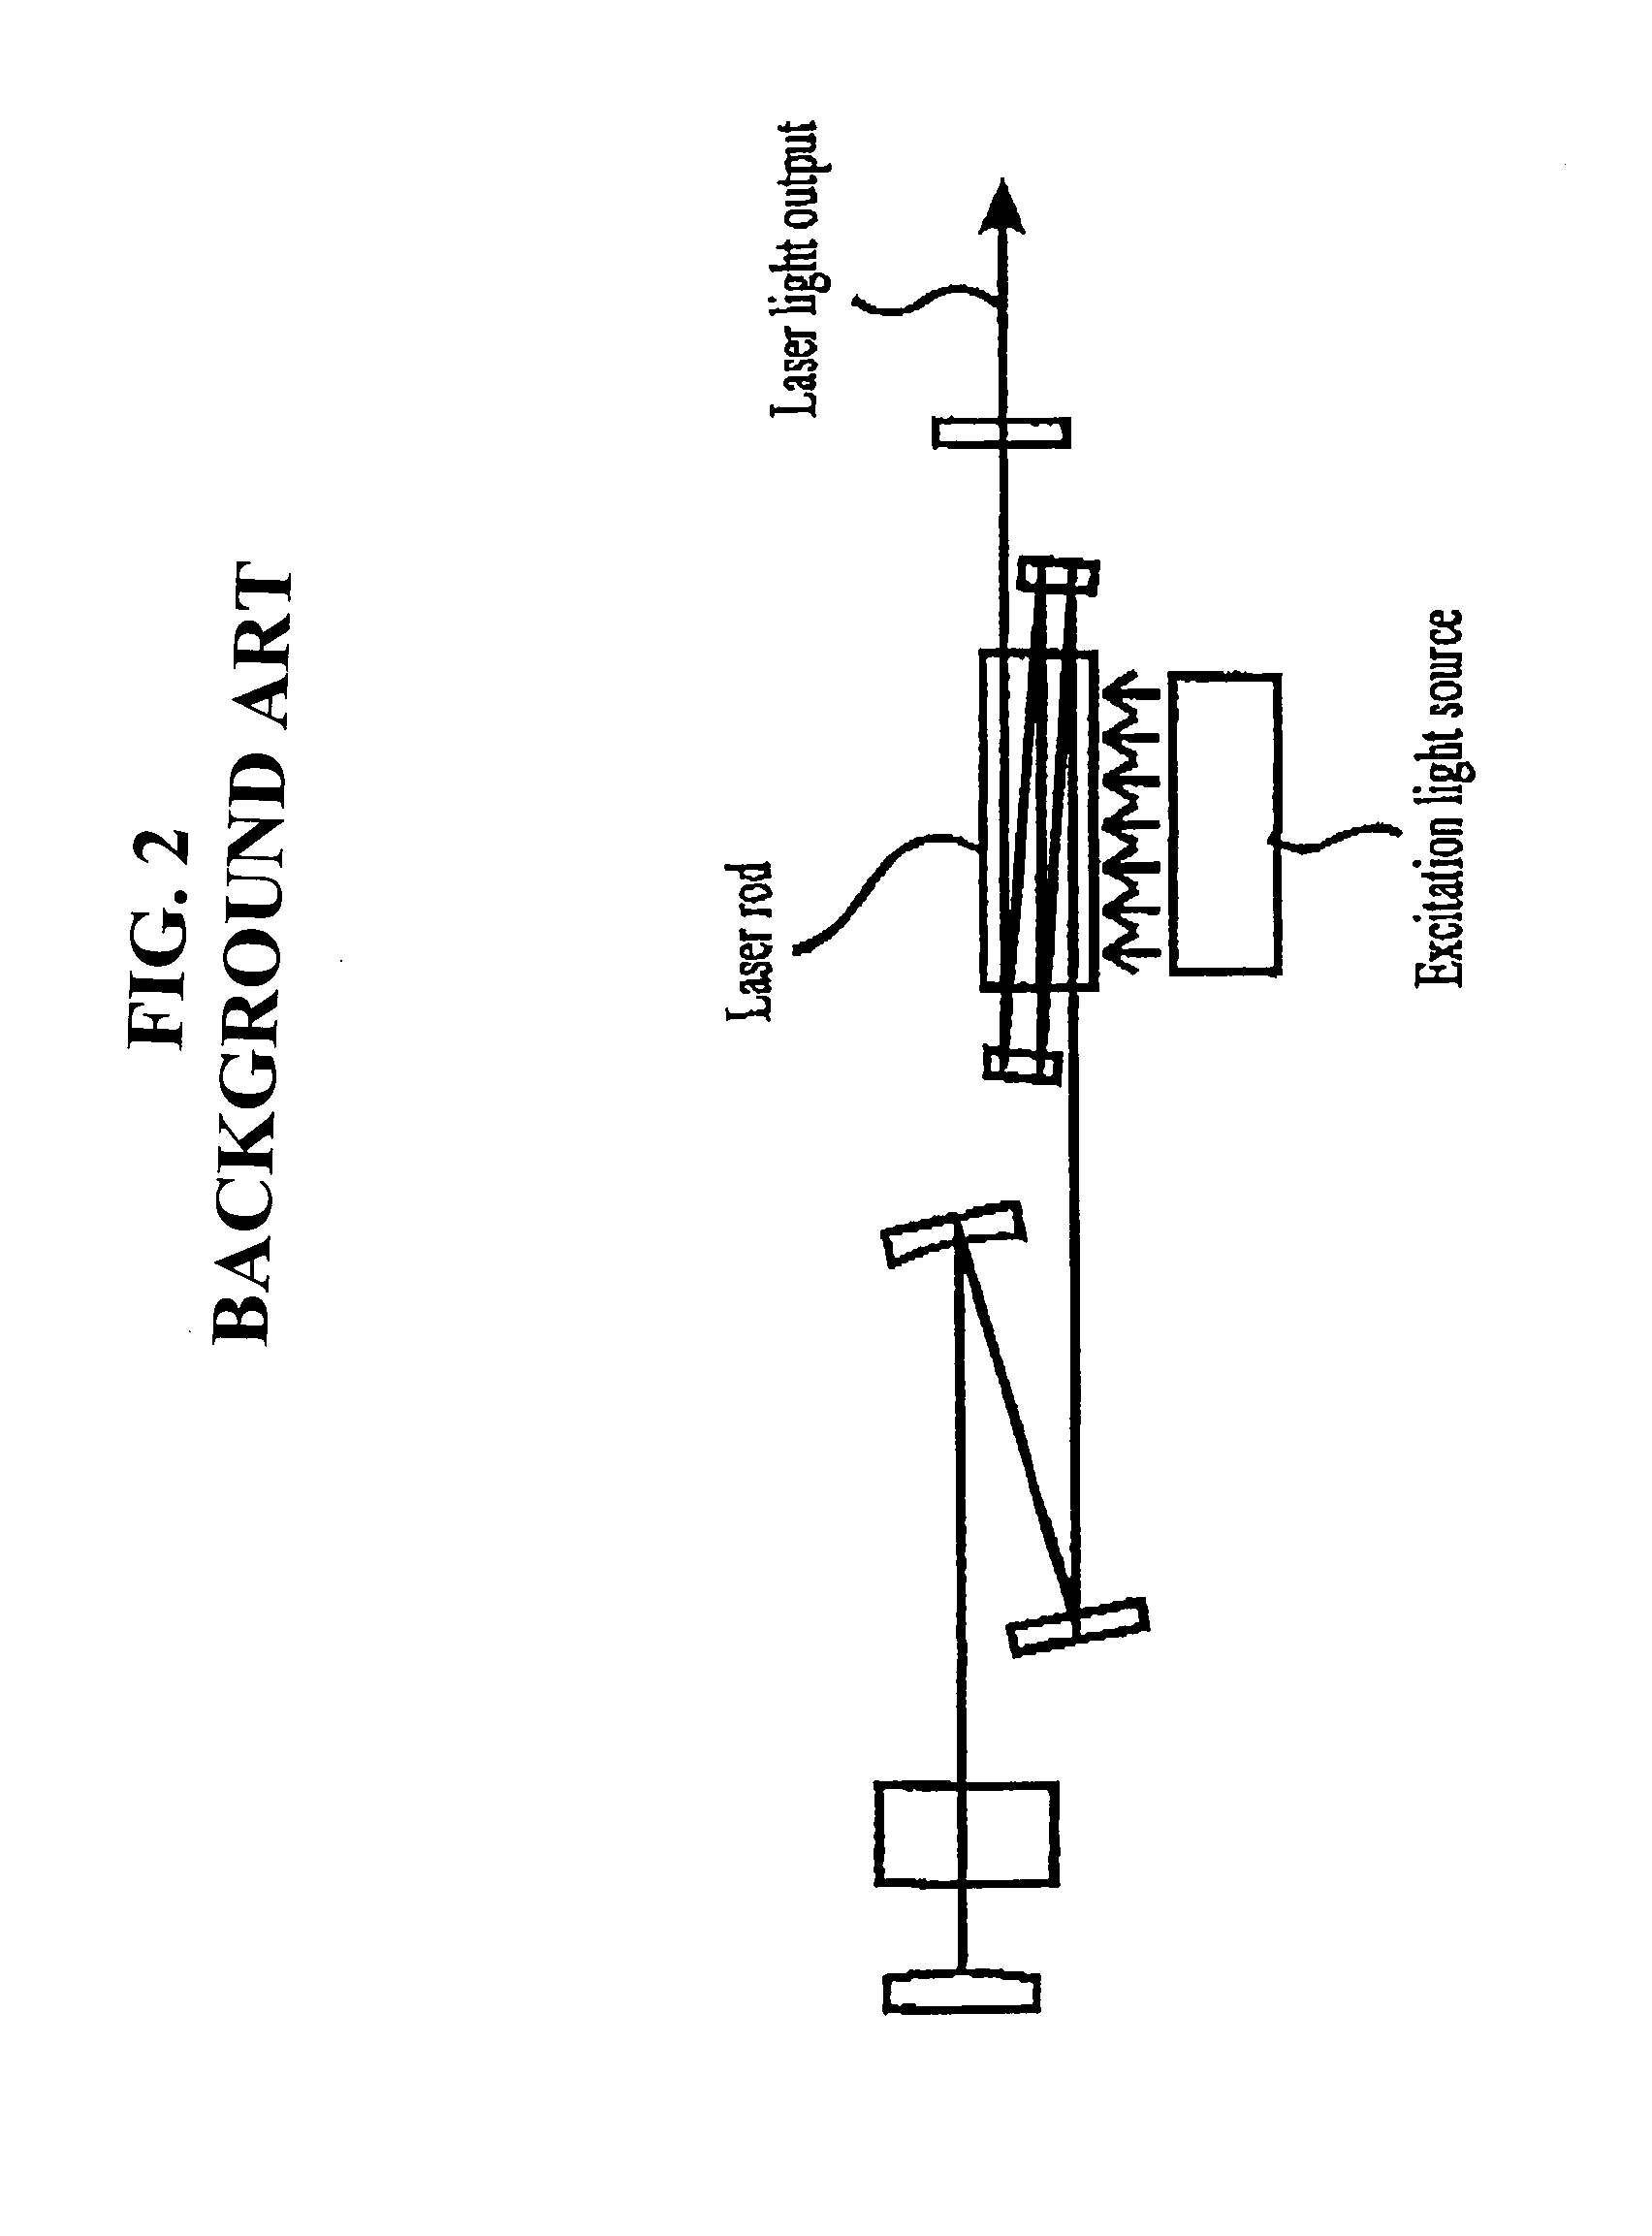 Multipath laser apparatus using a solid-state slab laser rod